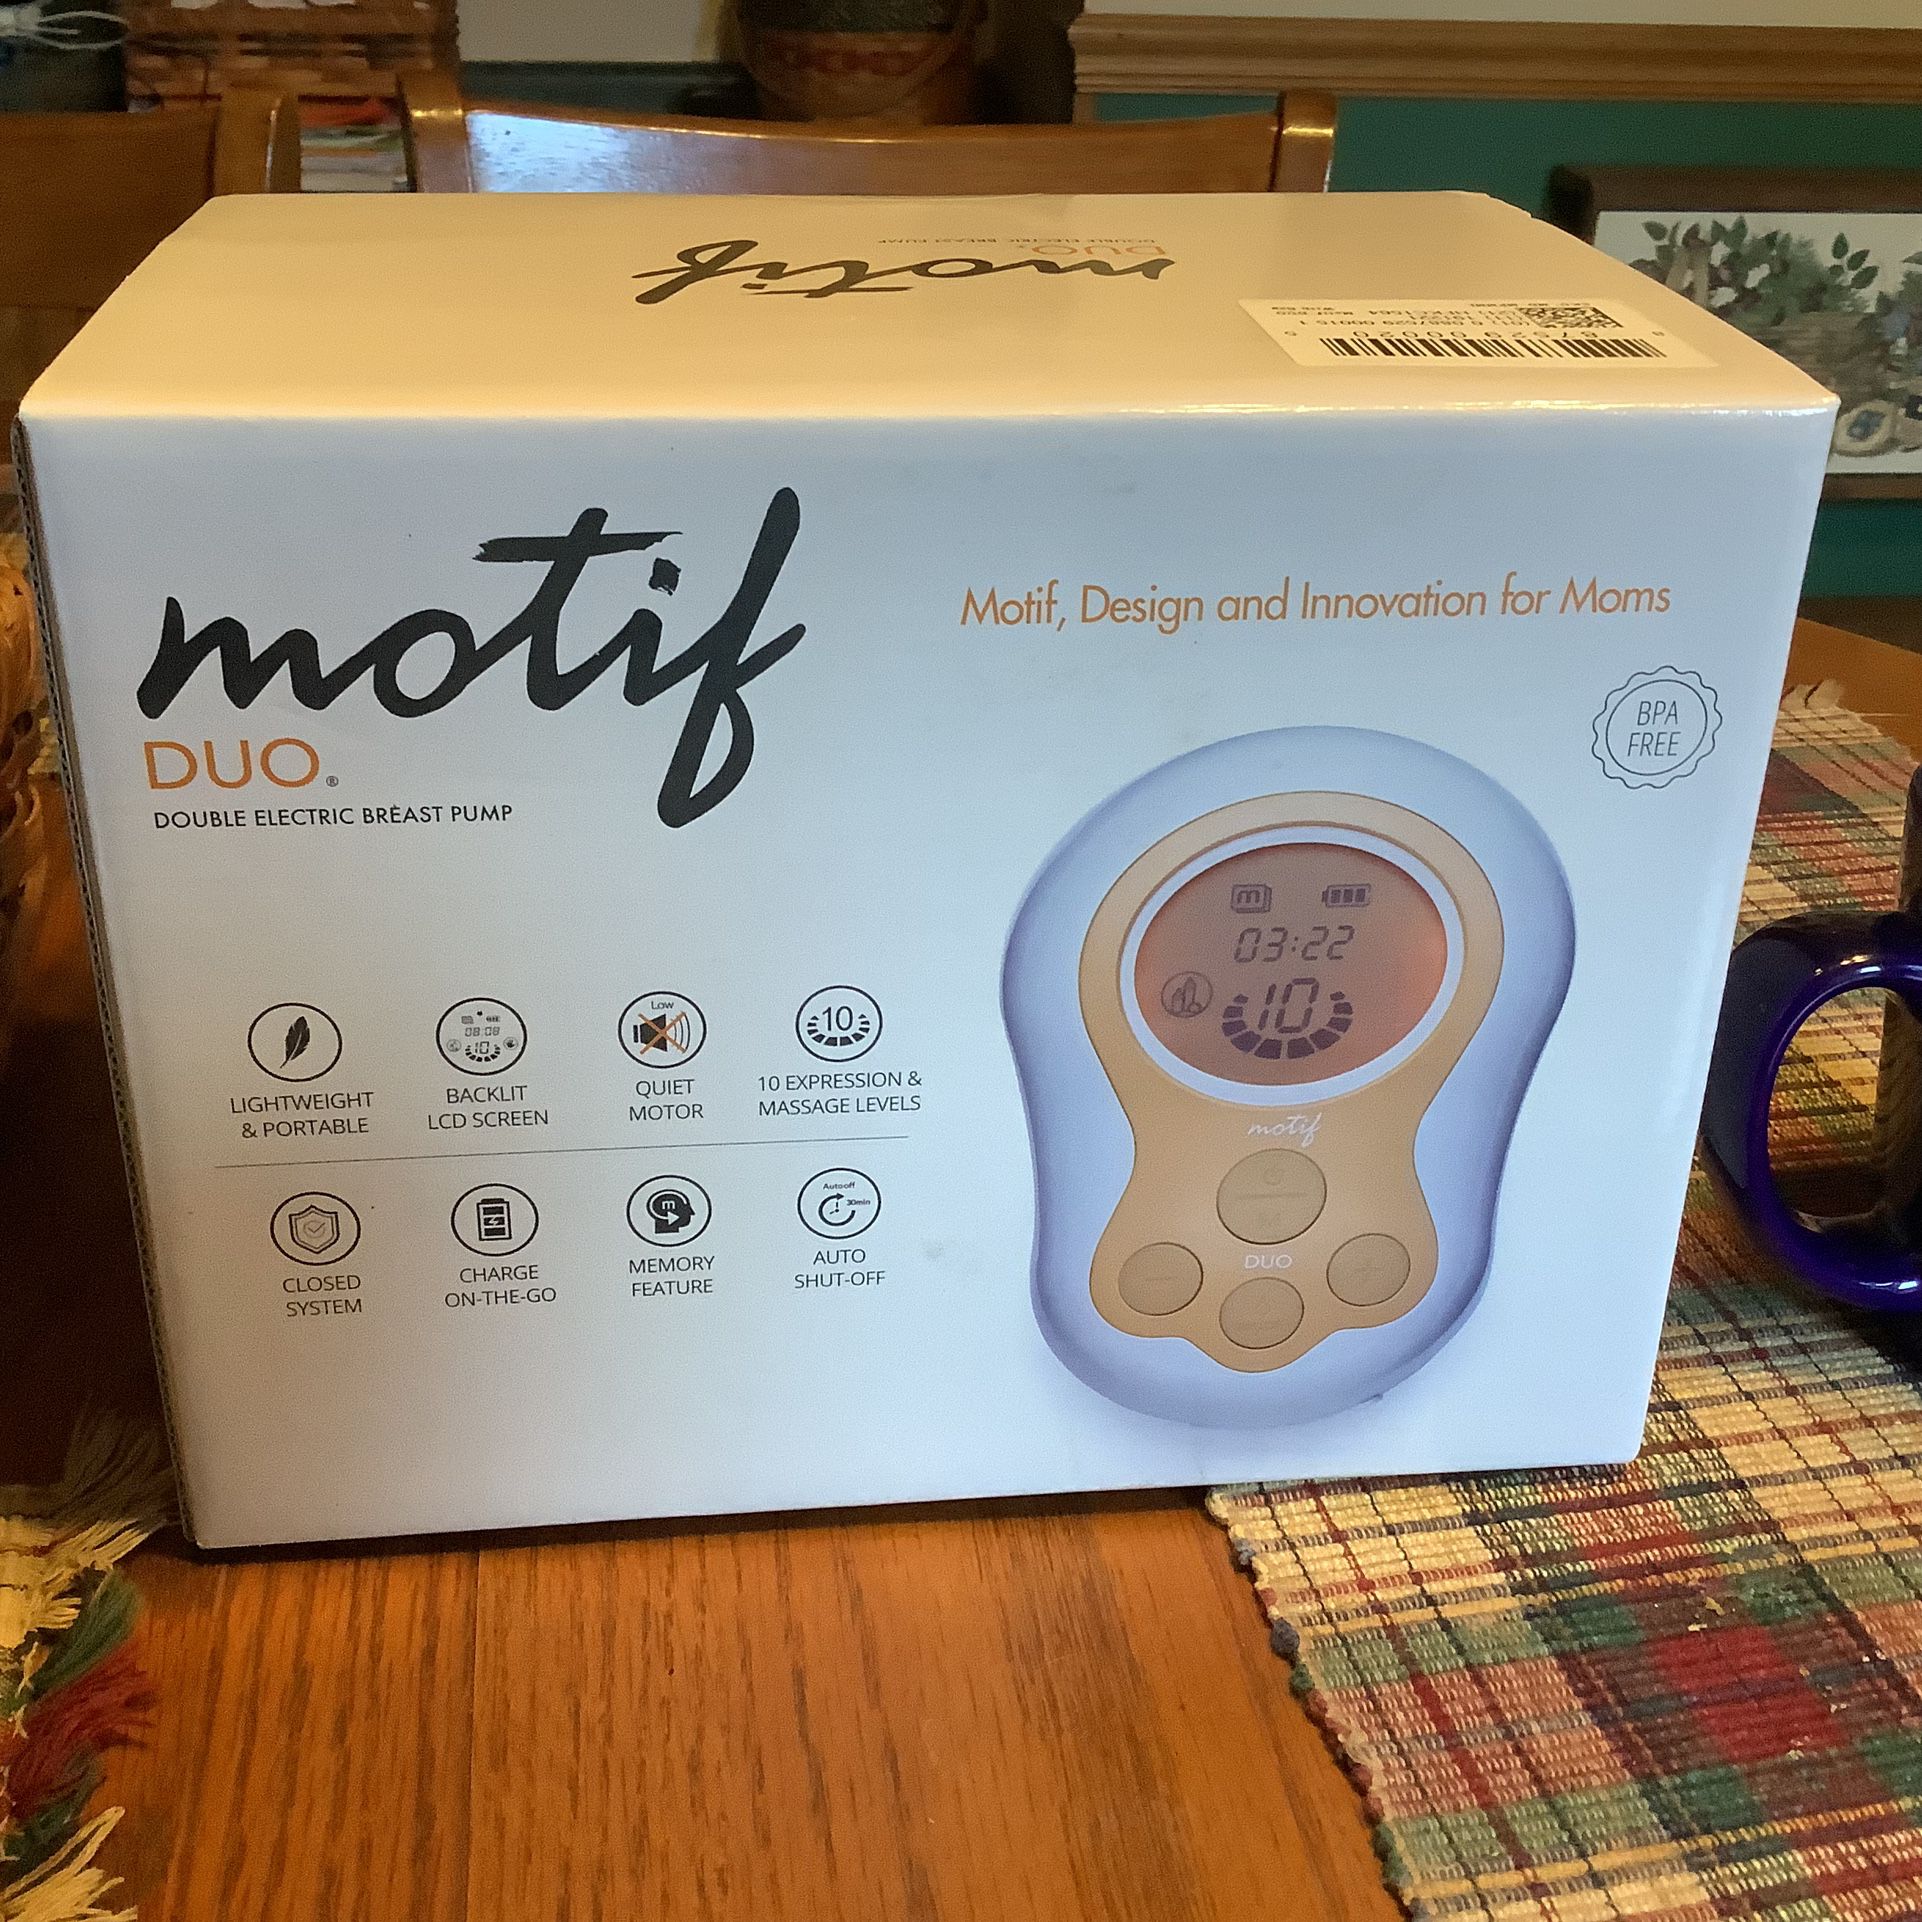 New Motif Duo Double Electric Breast Pump MD-20.2 Brand NEW